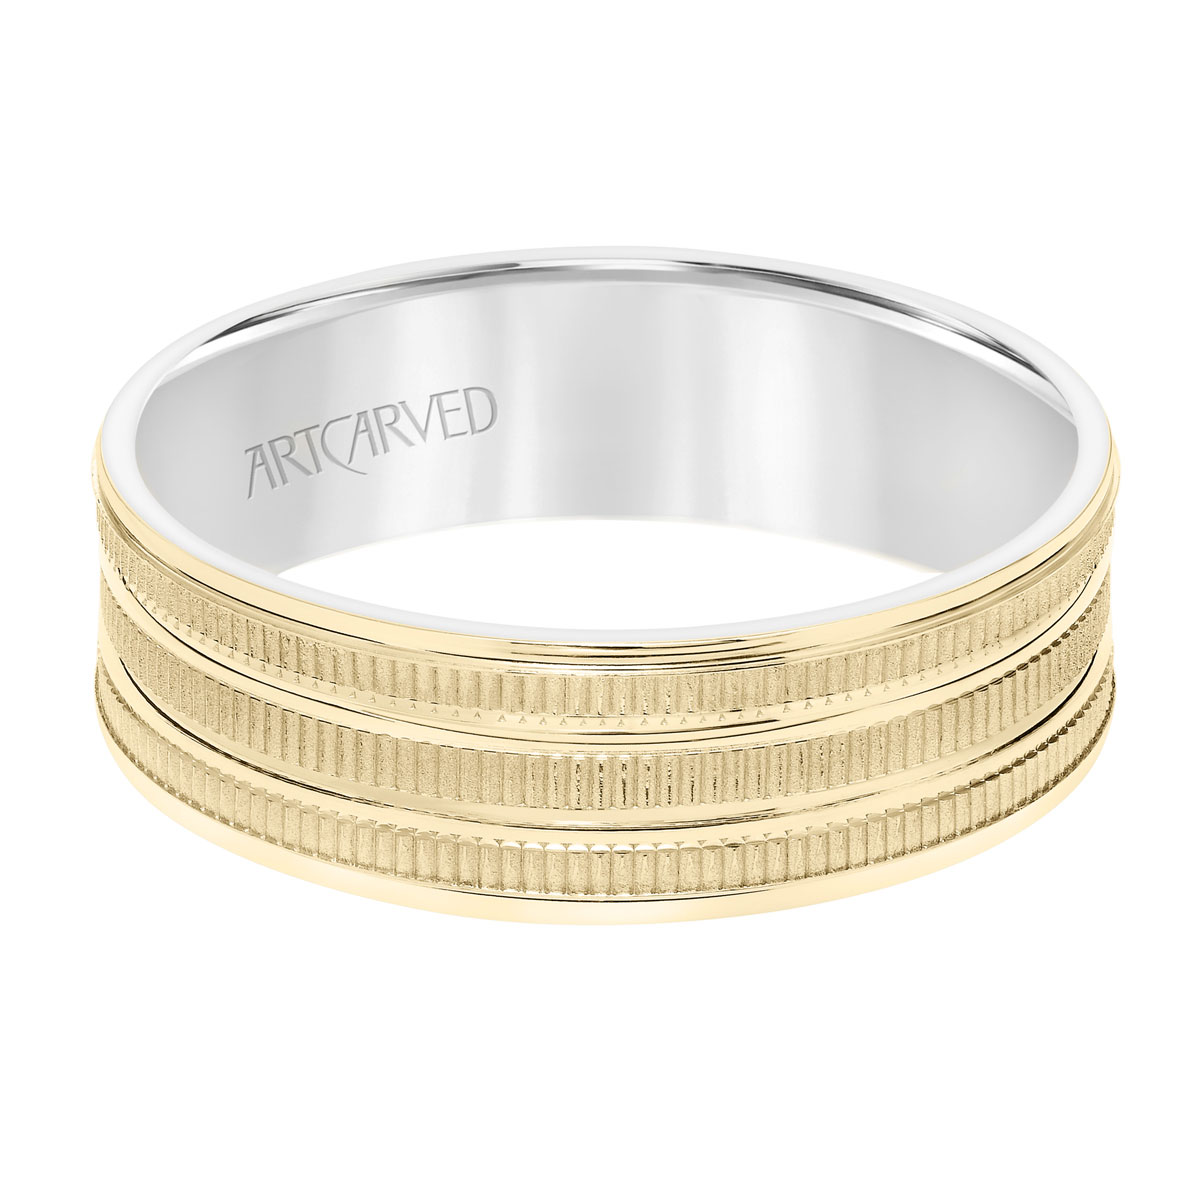 ArtCarved Two Tone 3 Row Coin Edge Wedding Band, Size 10